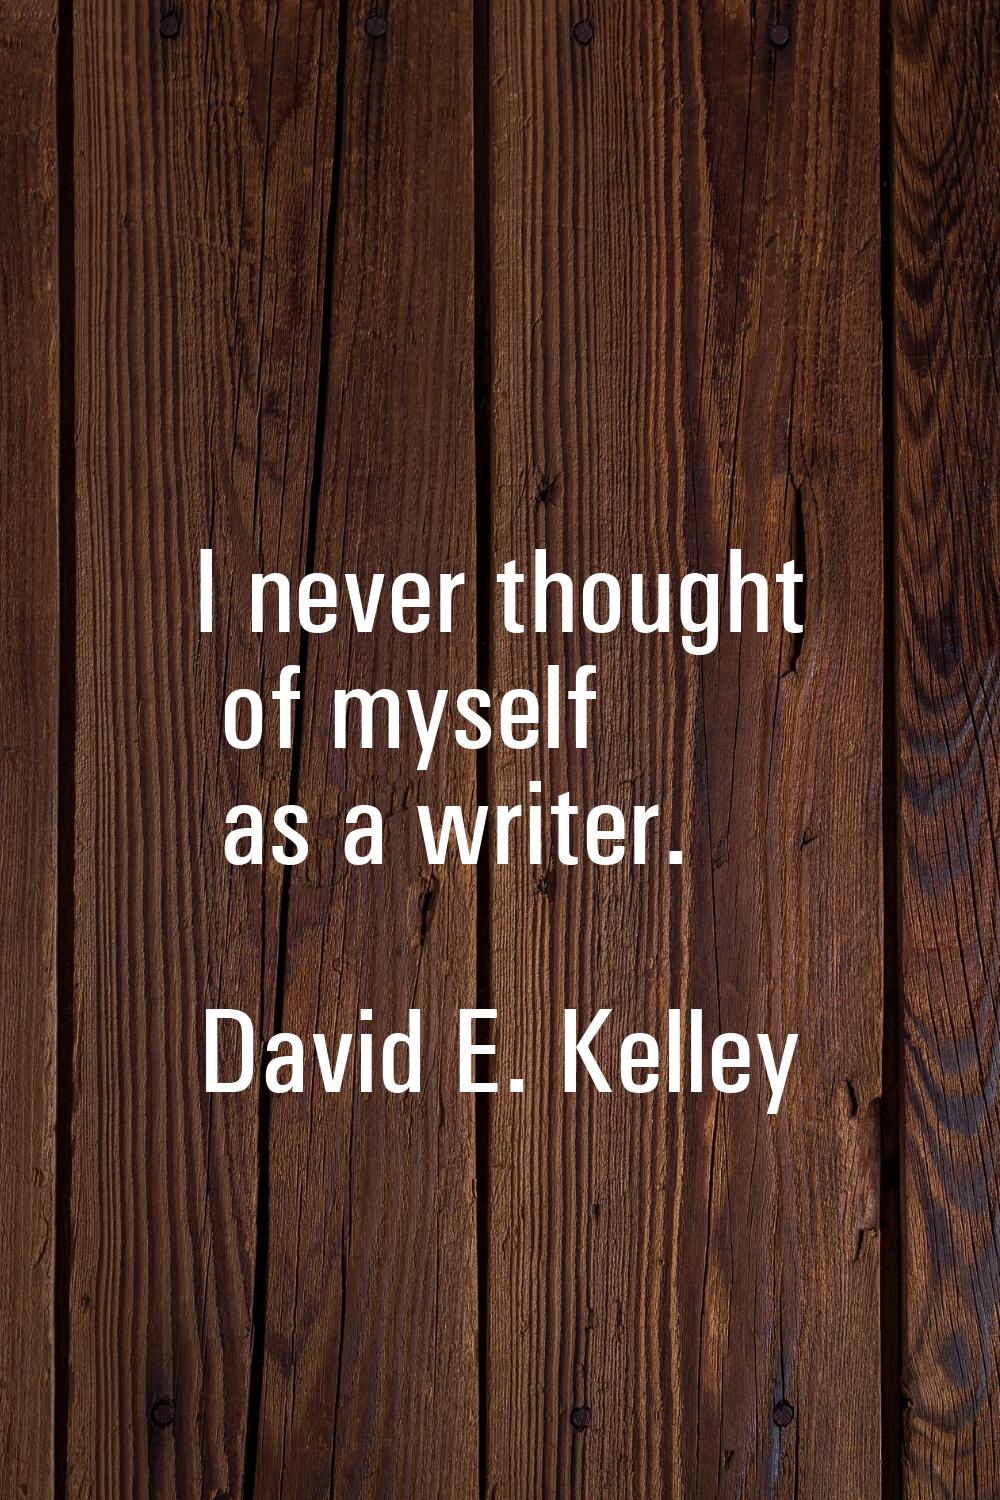 I never thought of myself as a writer.